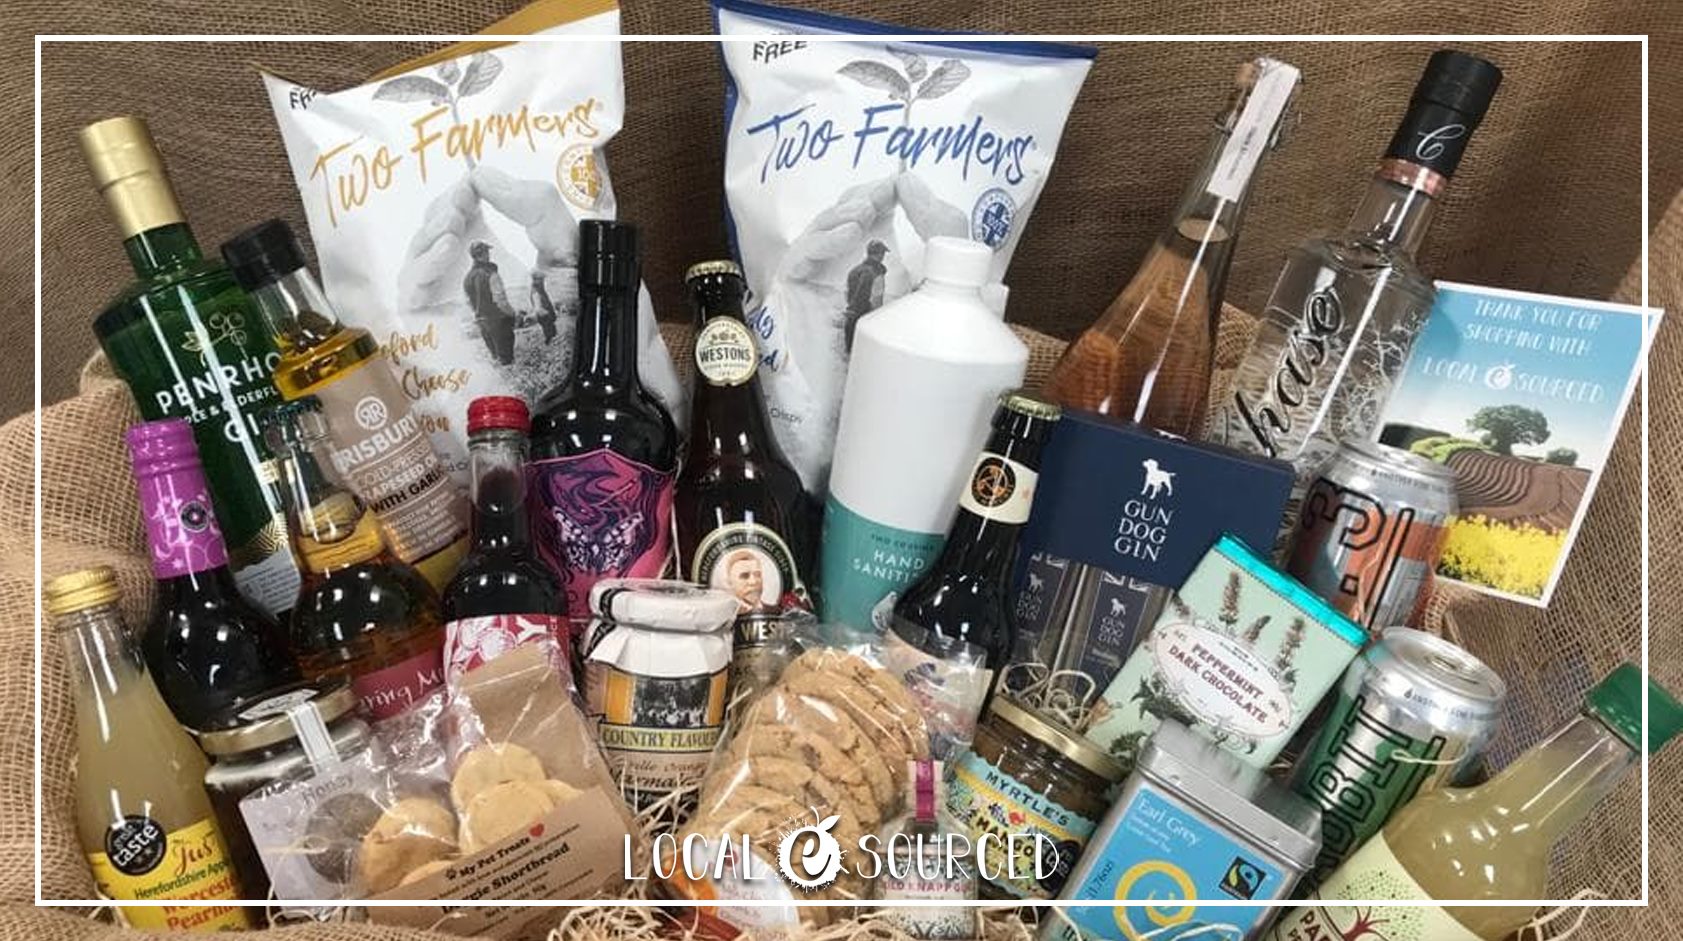 GIVEAWAY | Win a hamper full of Herefordshire produce